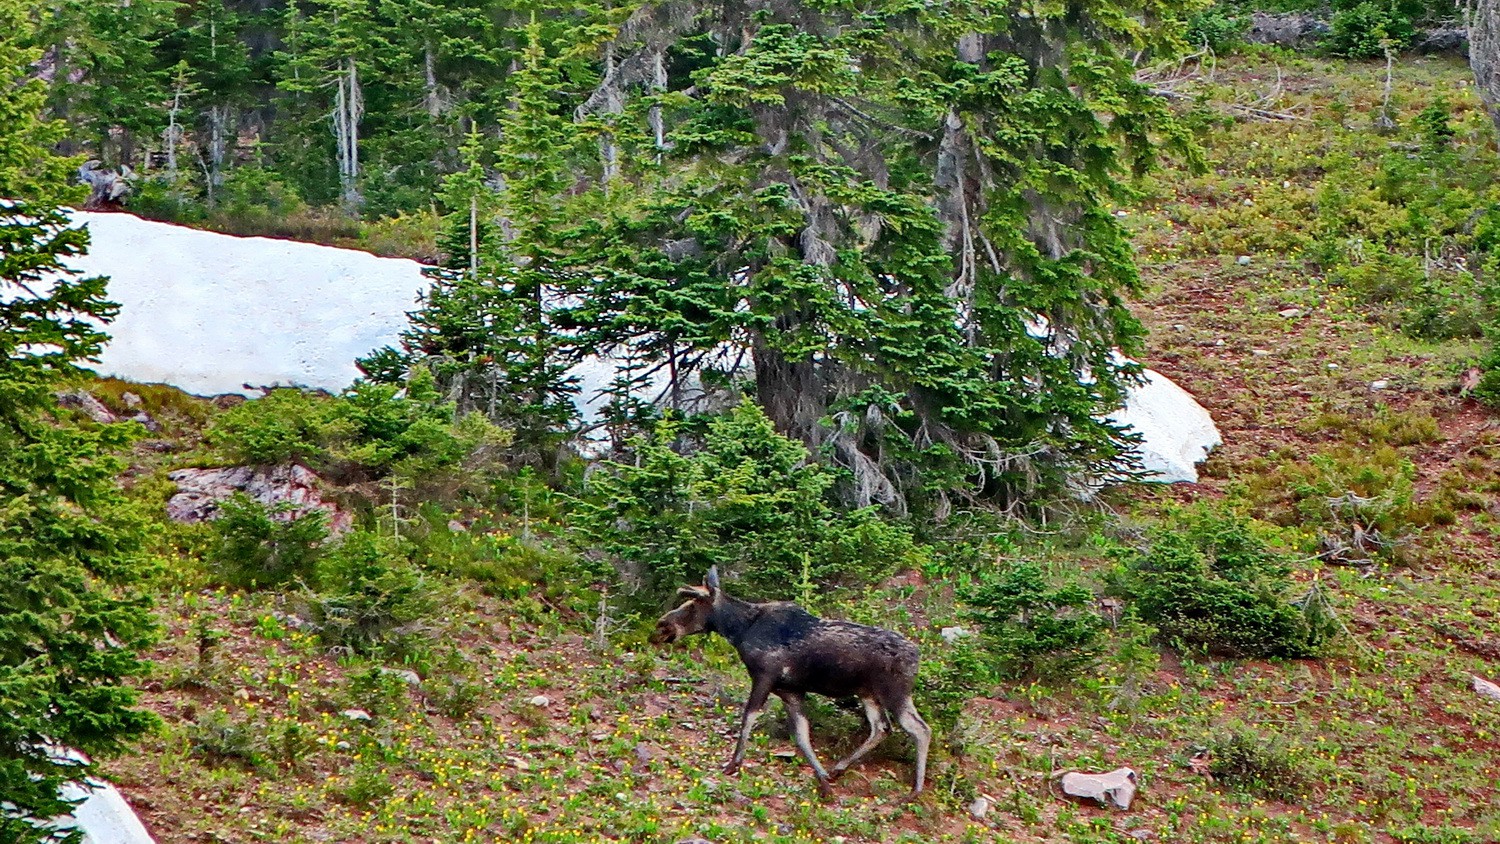 Our first Moose seen in freedom